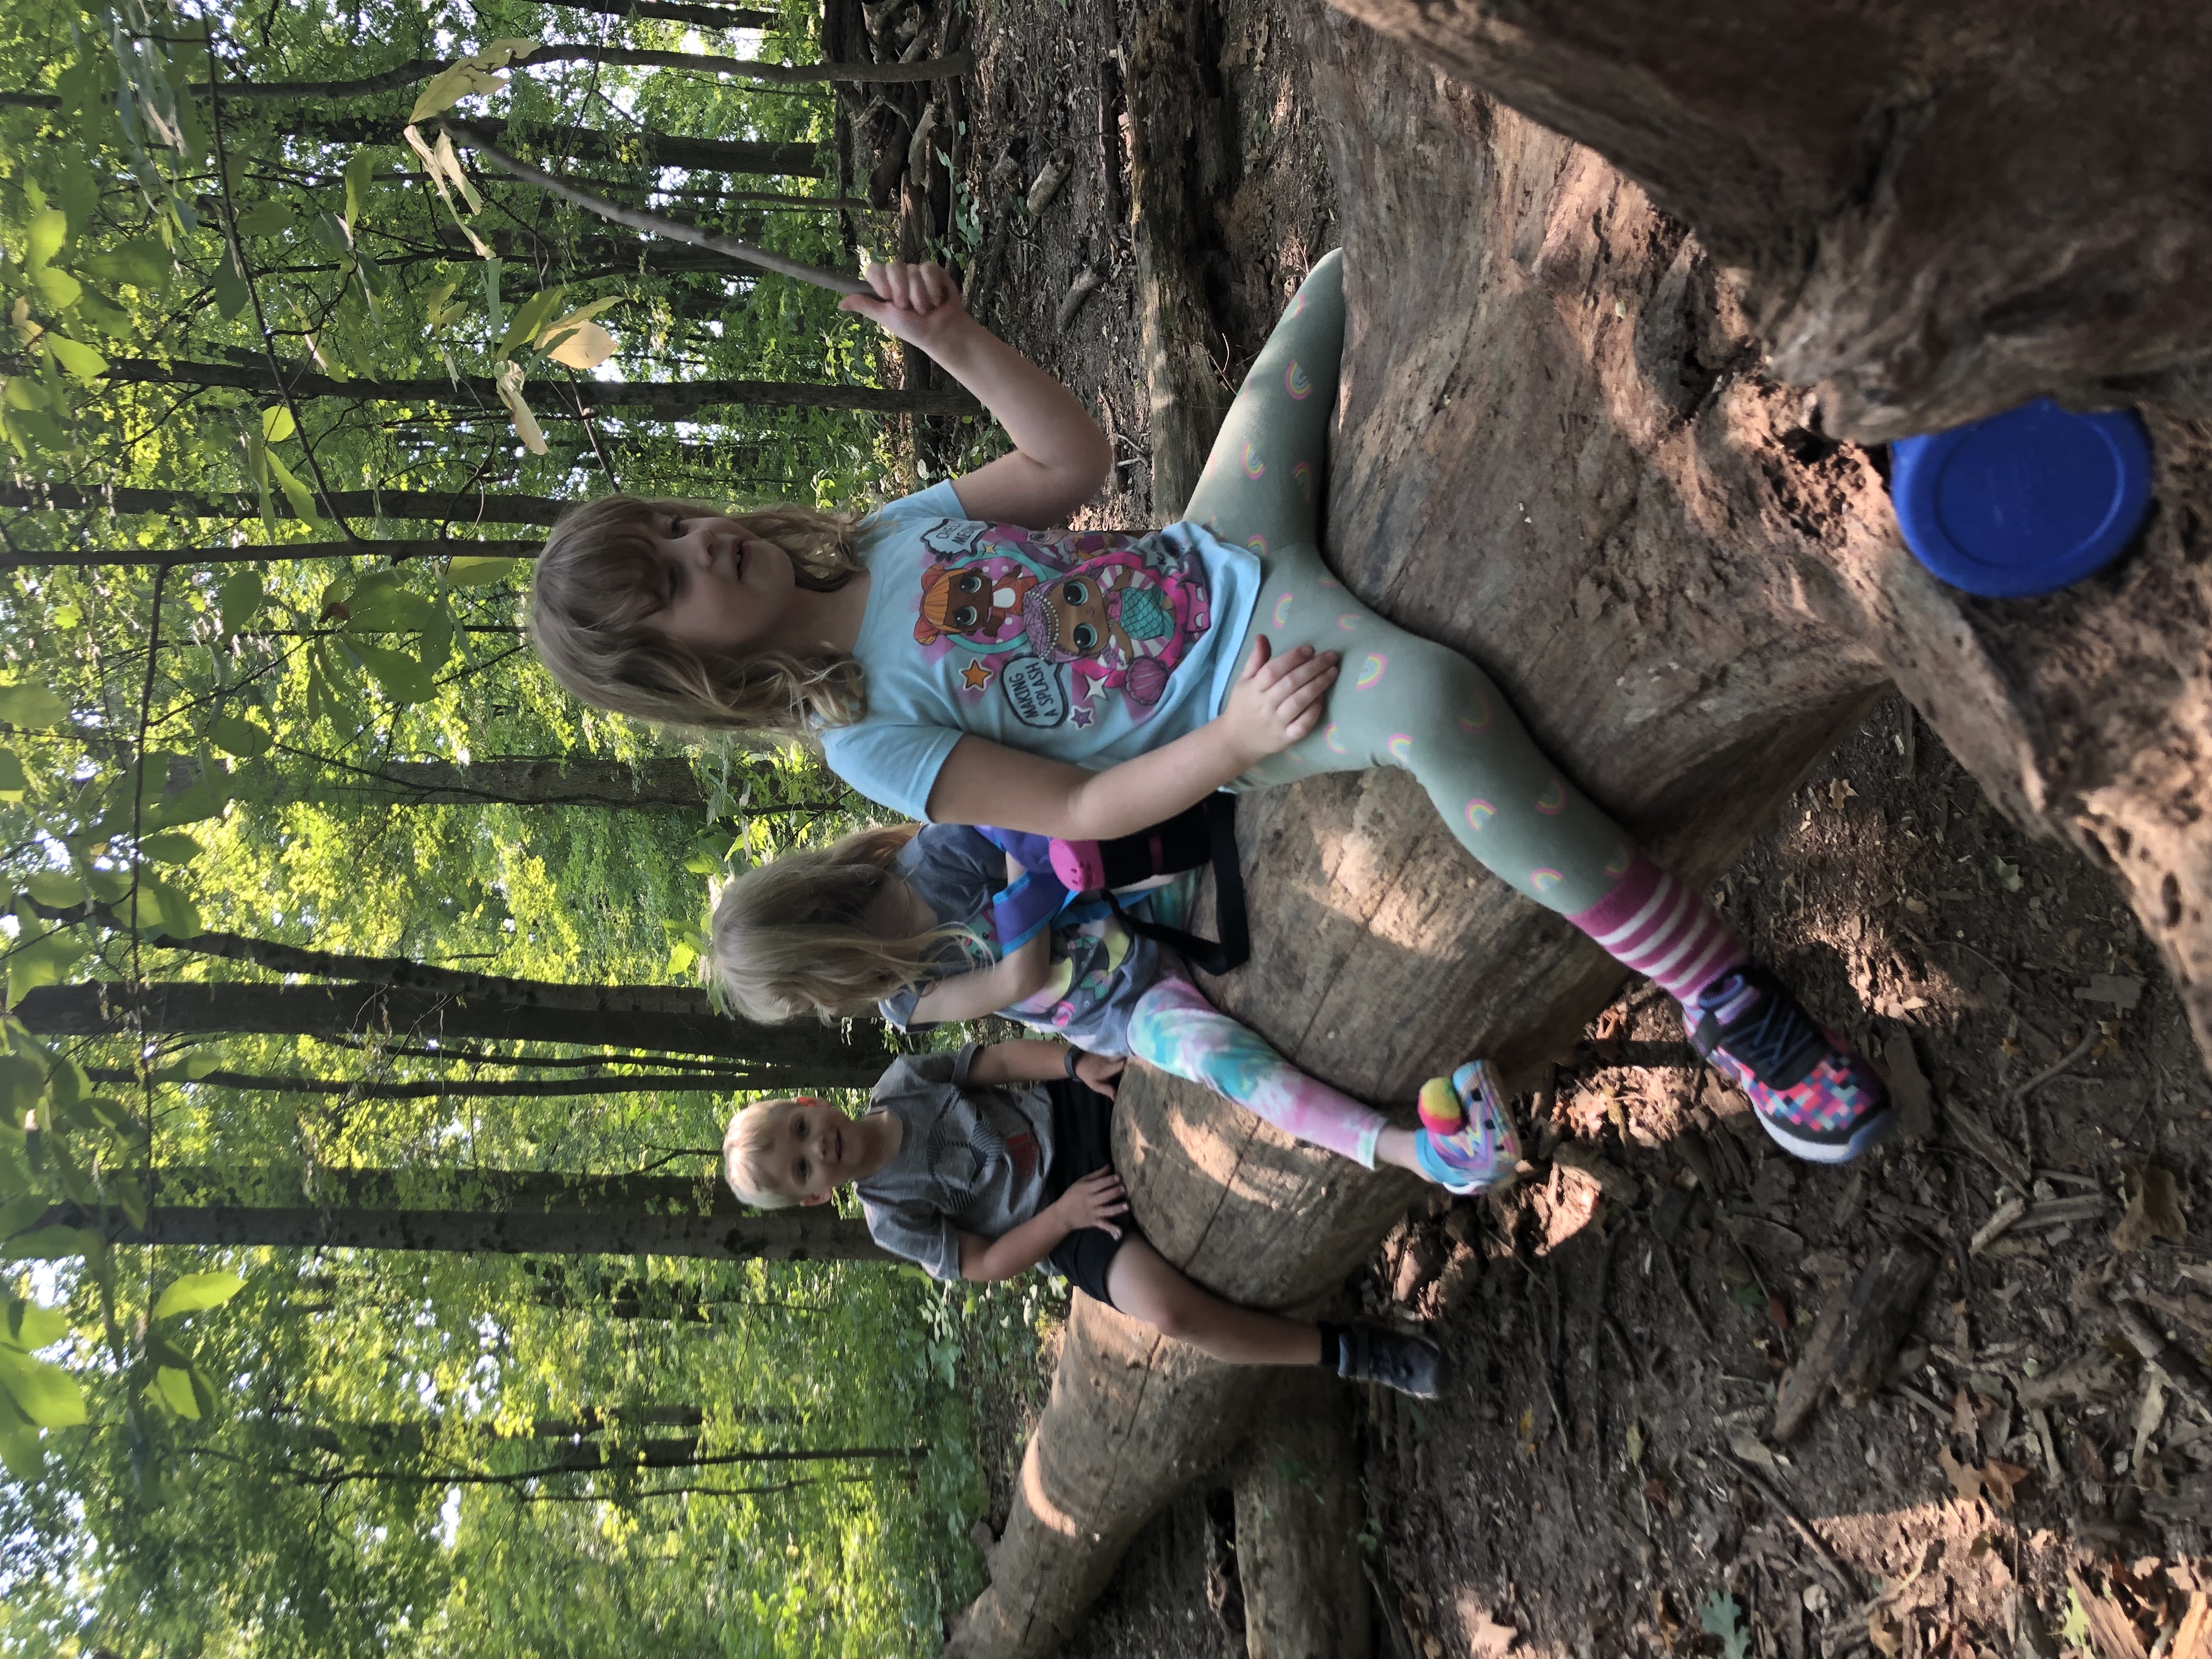 Young children explore the woods and climb on fallen logs